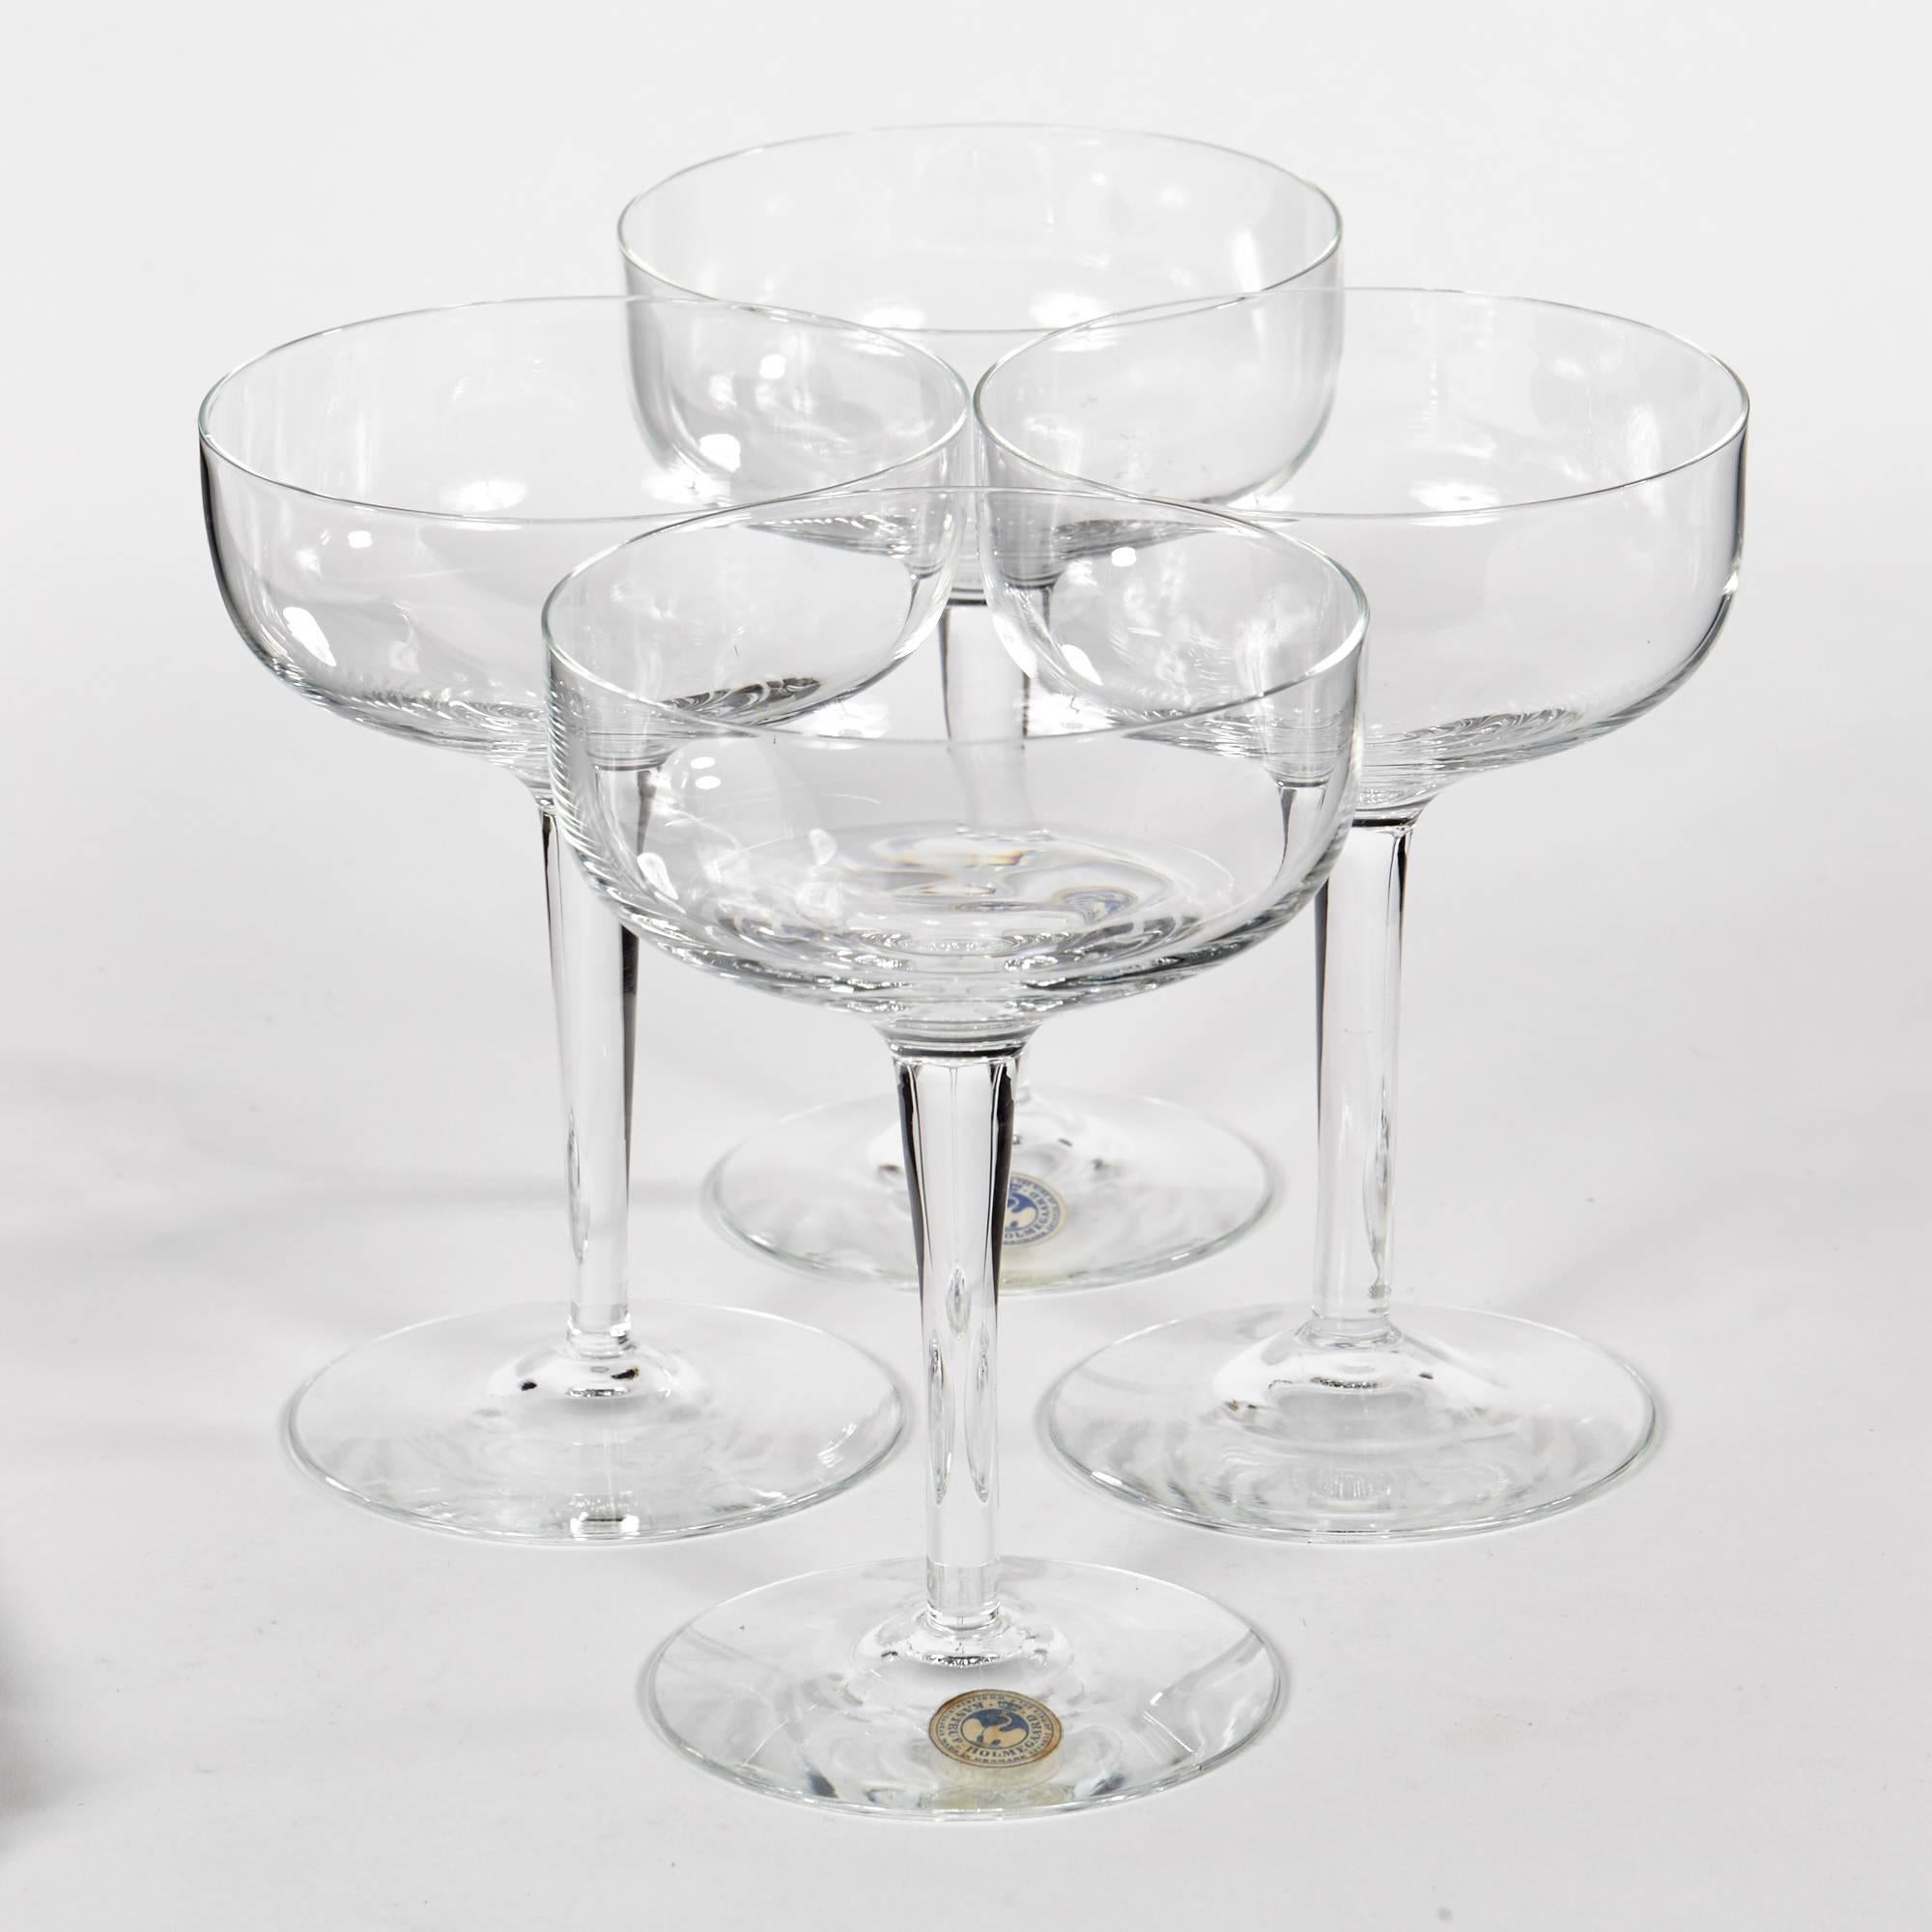 Vintage, 1960s Holmegaard of Denmark set of four clear glass coupe stems with the original stickers.